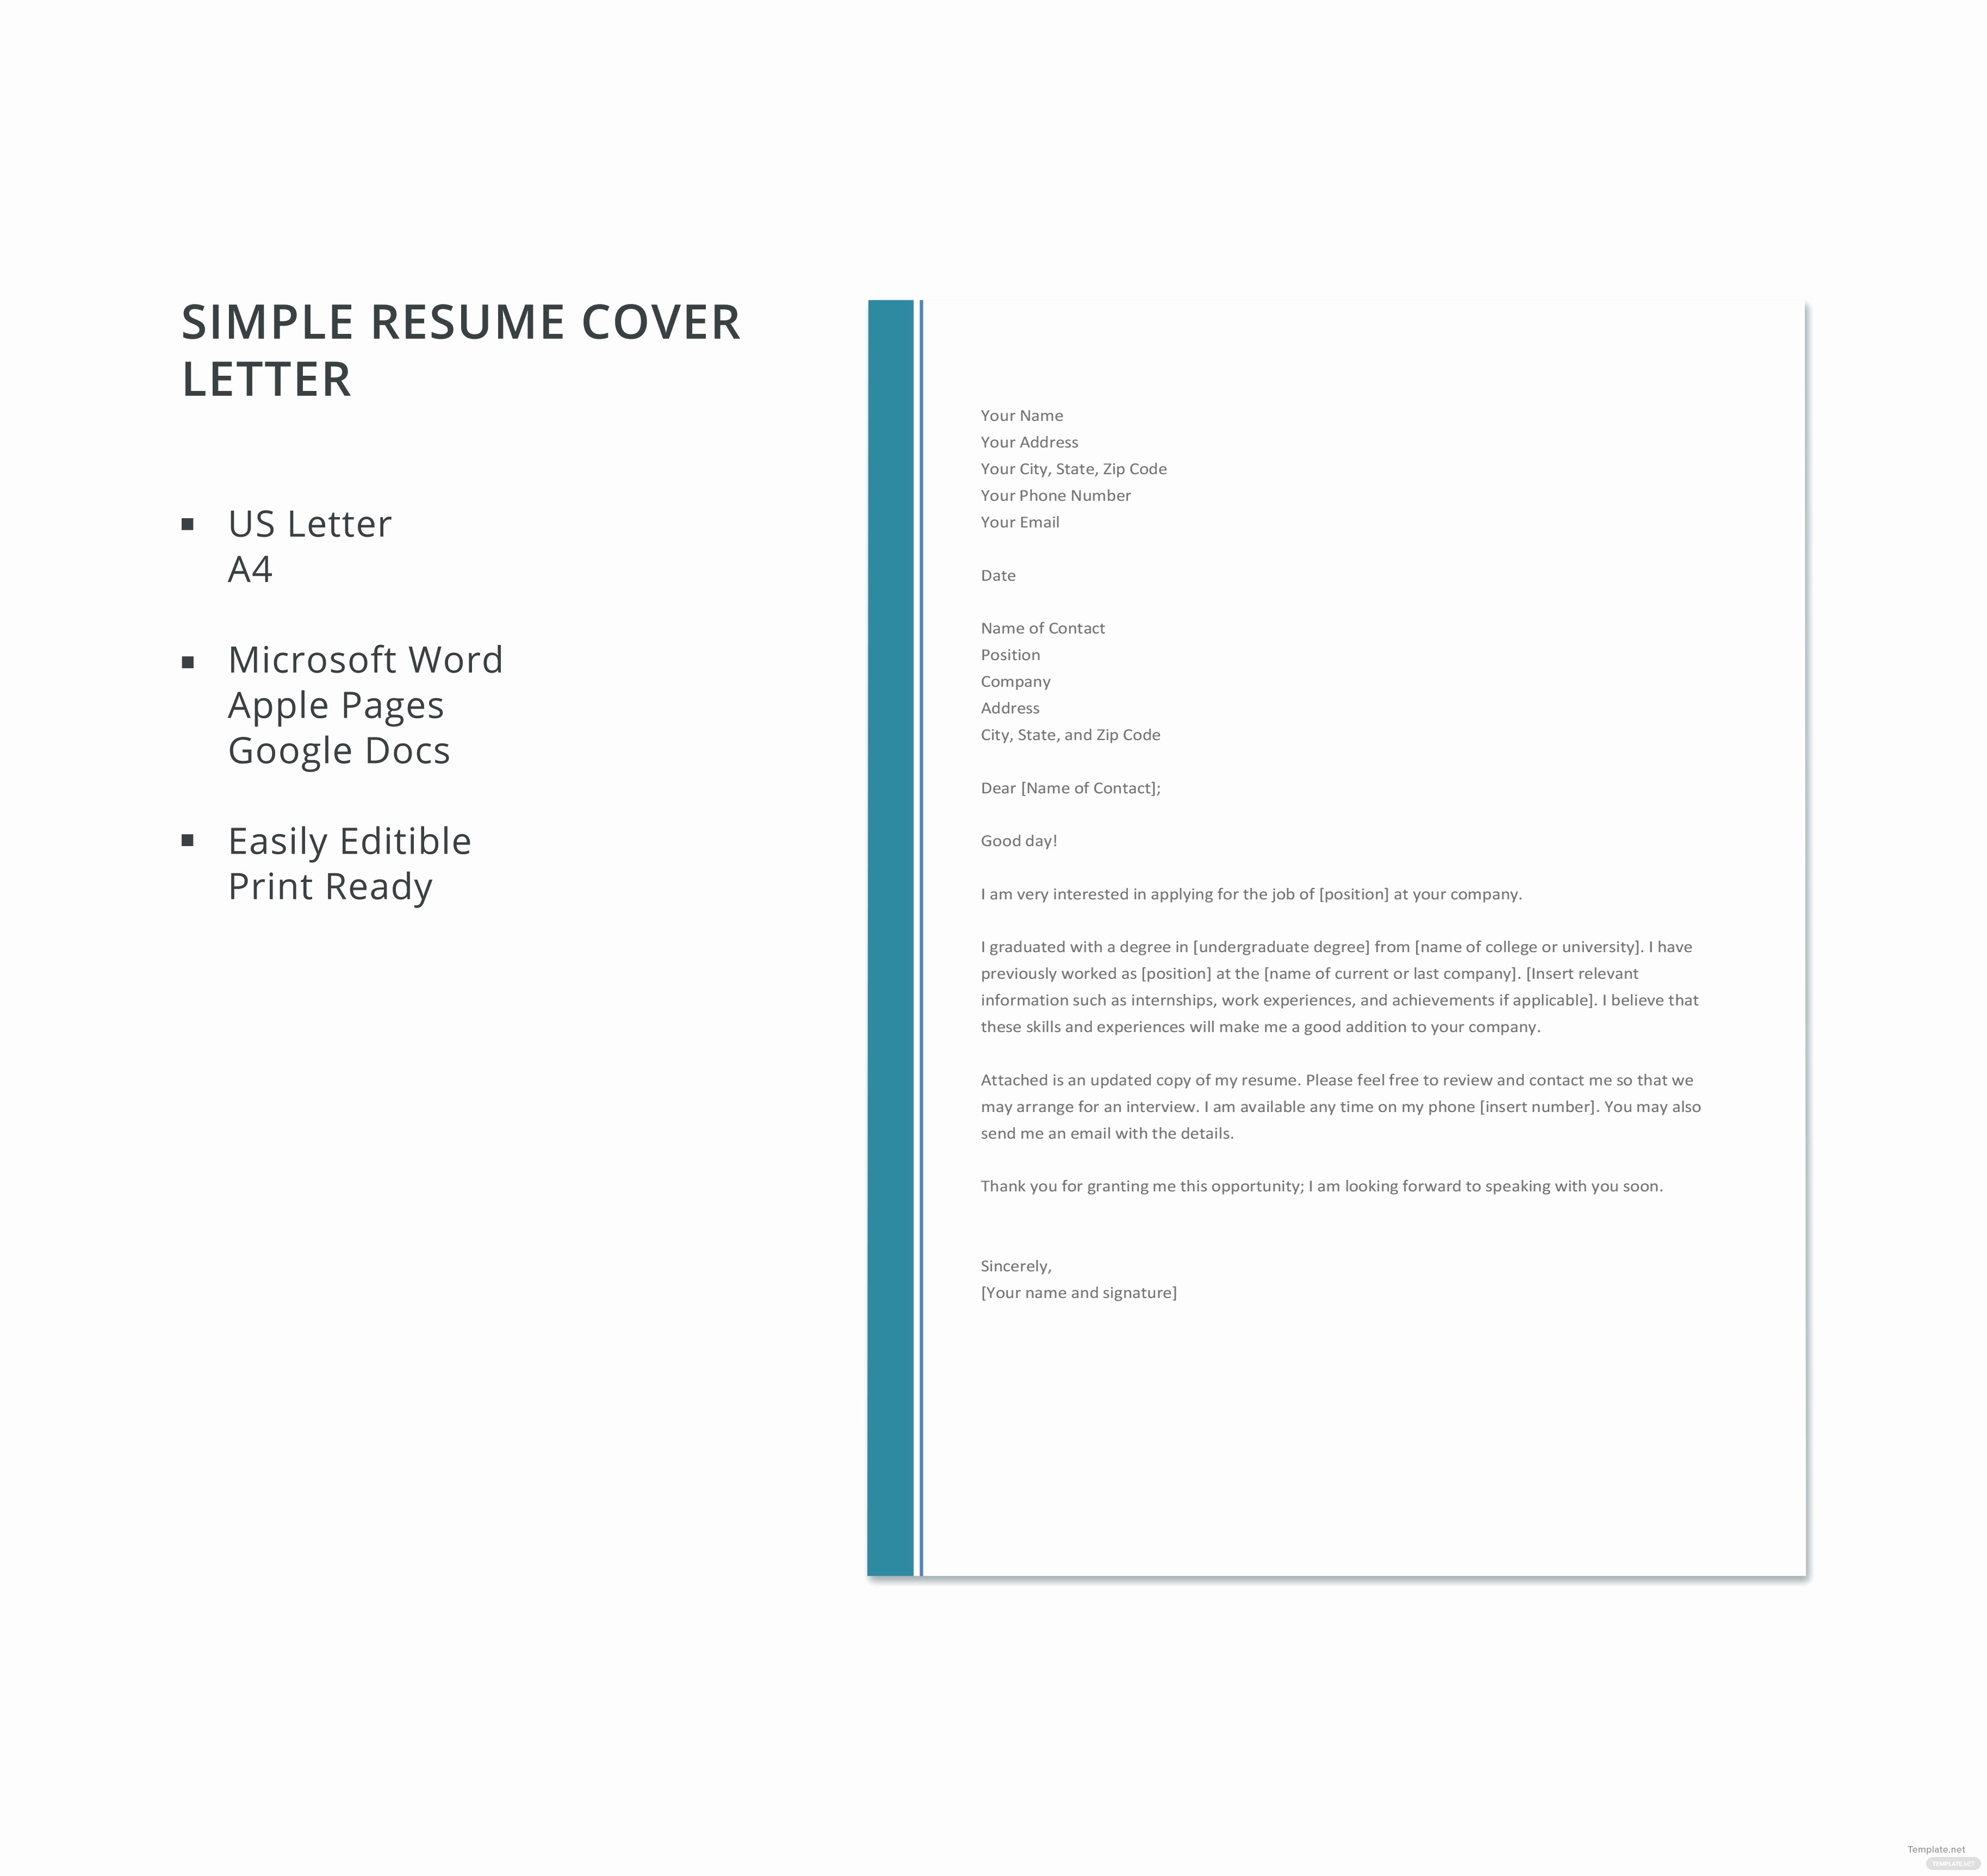 Simple Resume Cover Letter Template Unique Free Simple Resume Cover Letter Template In Microsoft Word